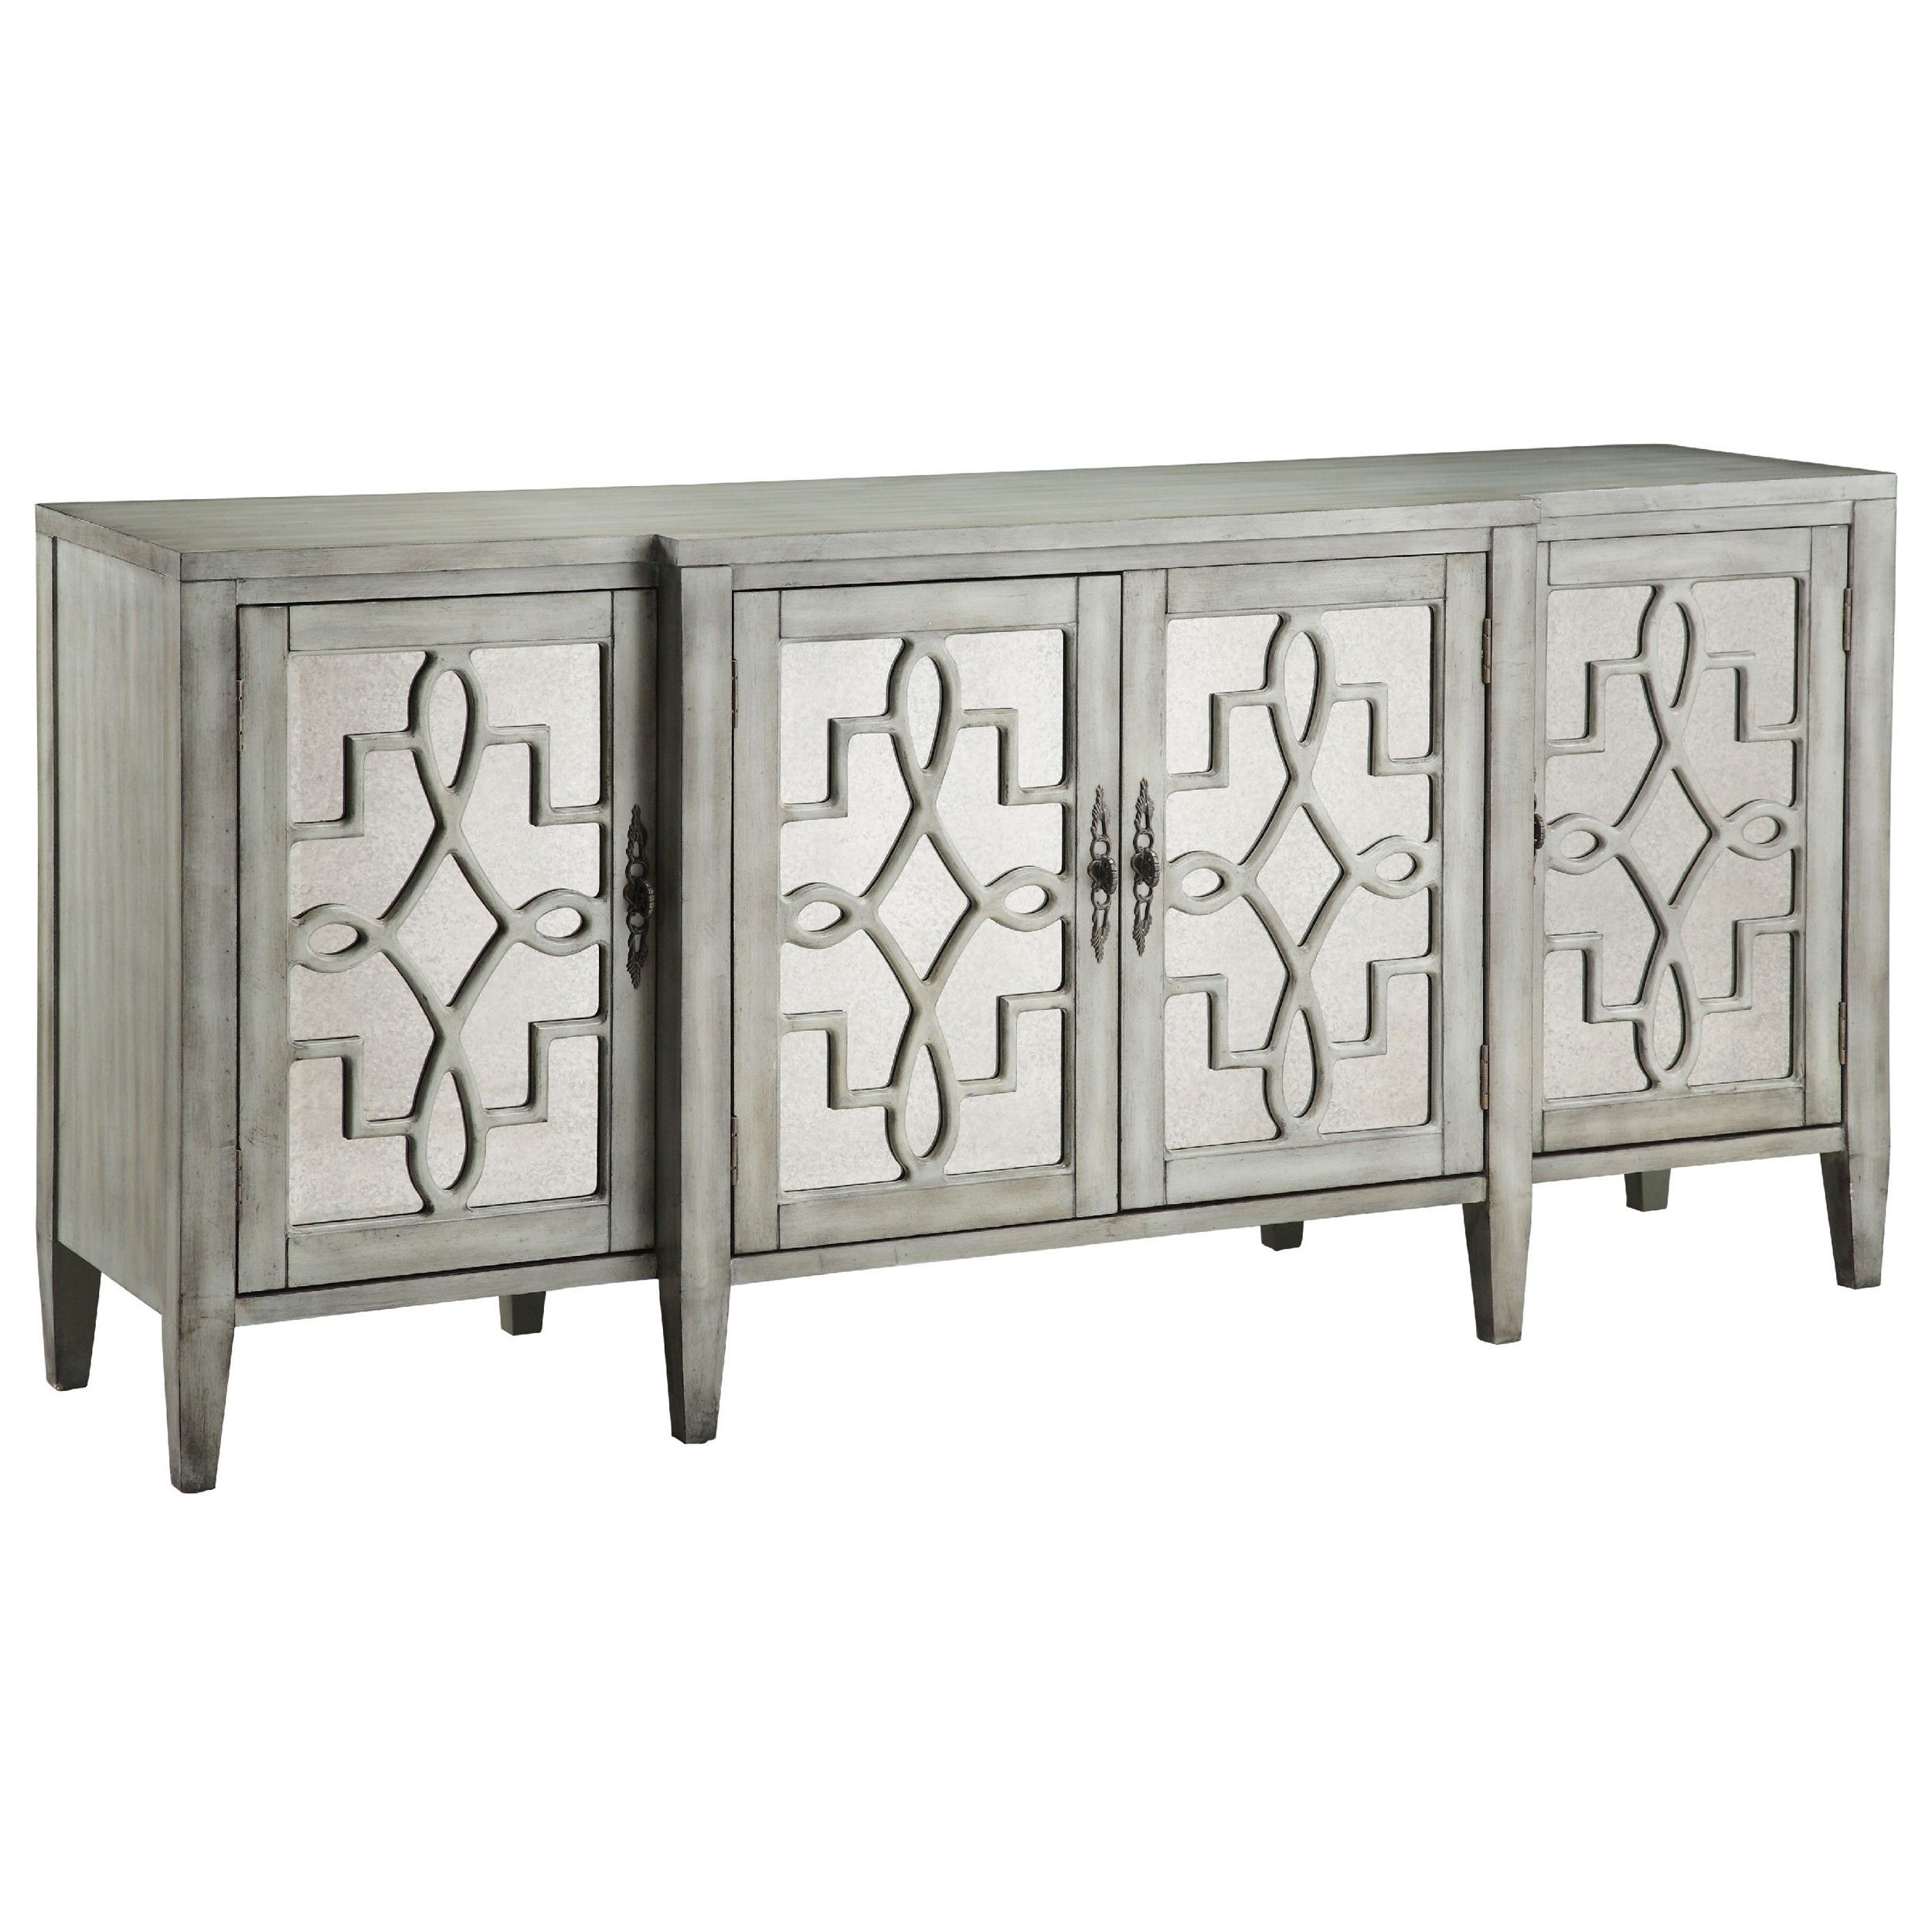 Isabelle Credenza | Furnishings | Pinterest | Credenza, Sideboard Throughout Most Recently Released Aged Mirrored 4 Door Sideboards (View 5 of 20)